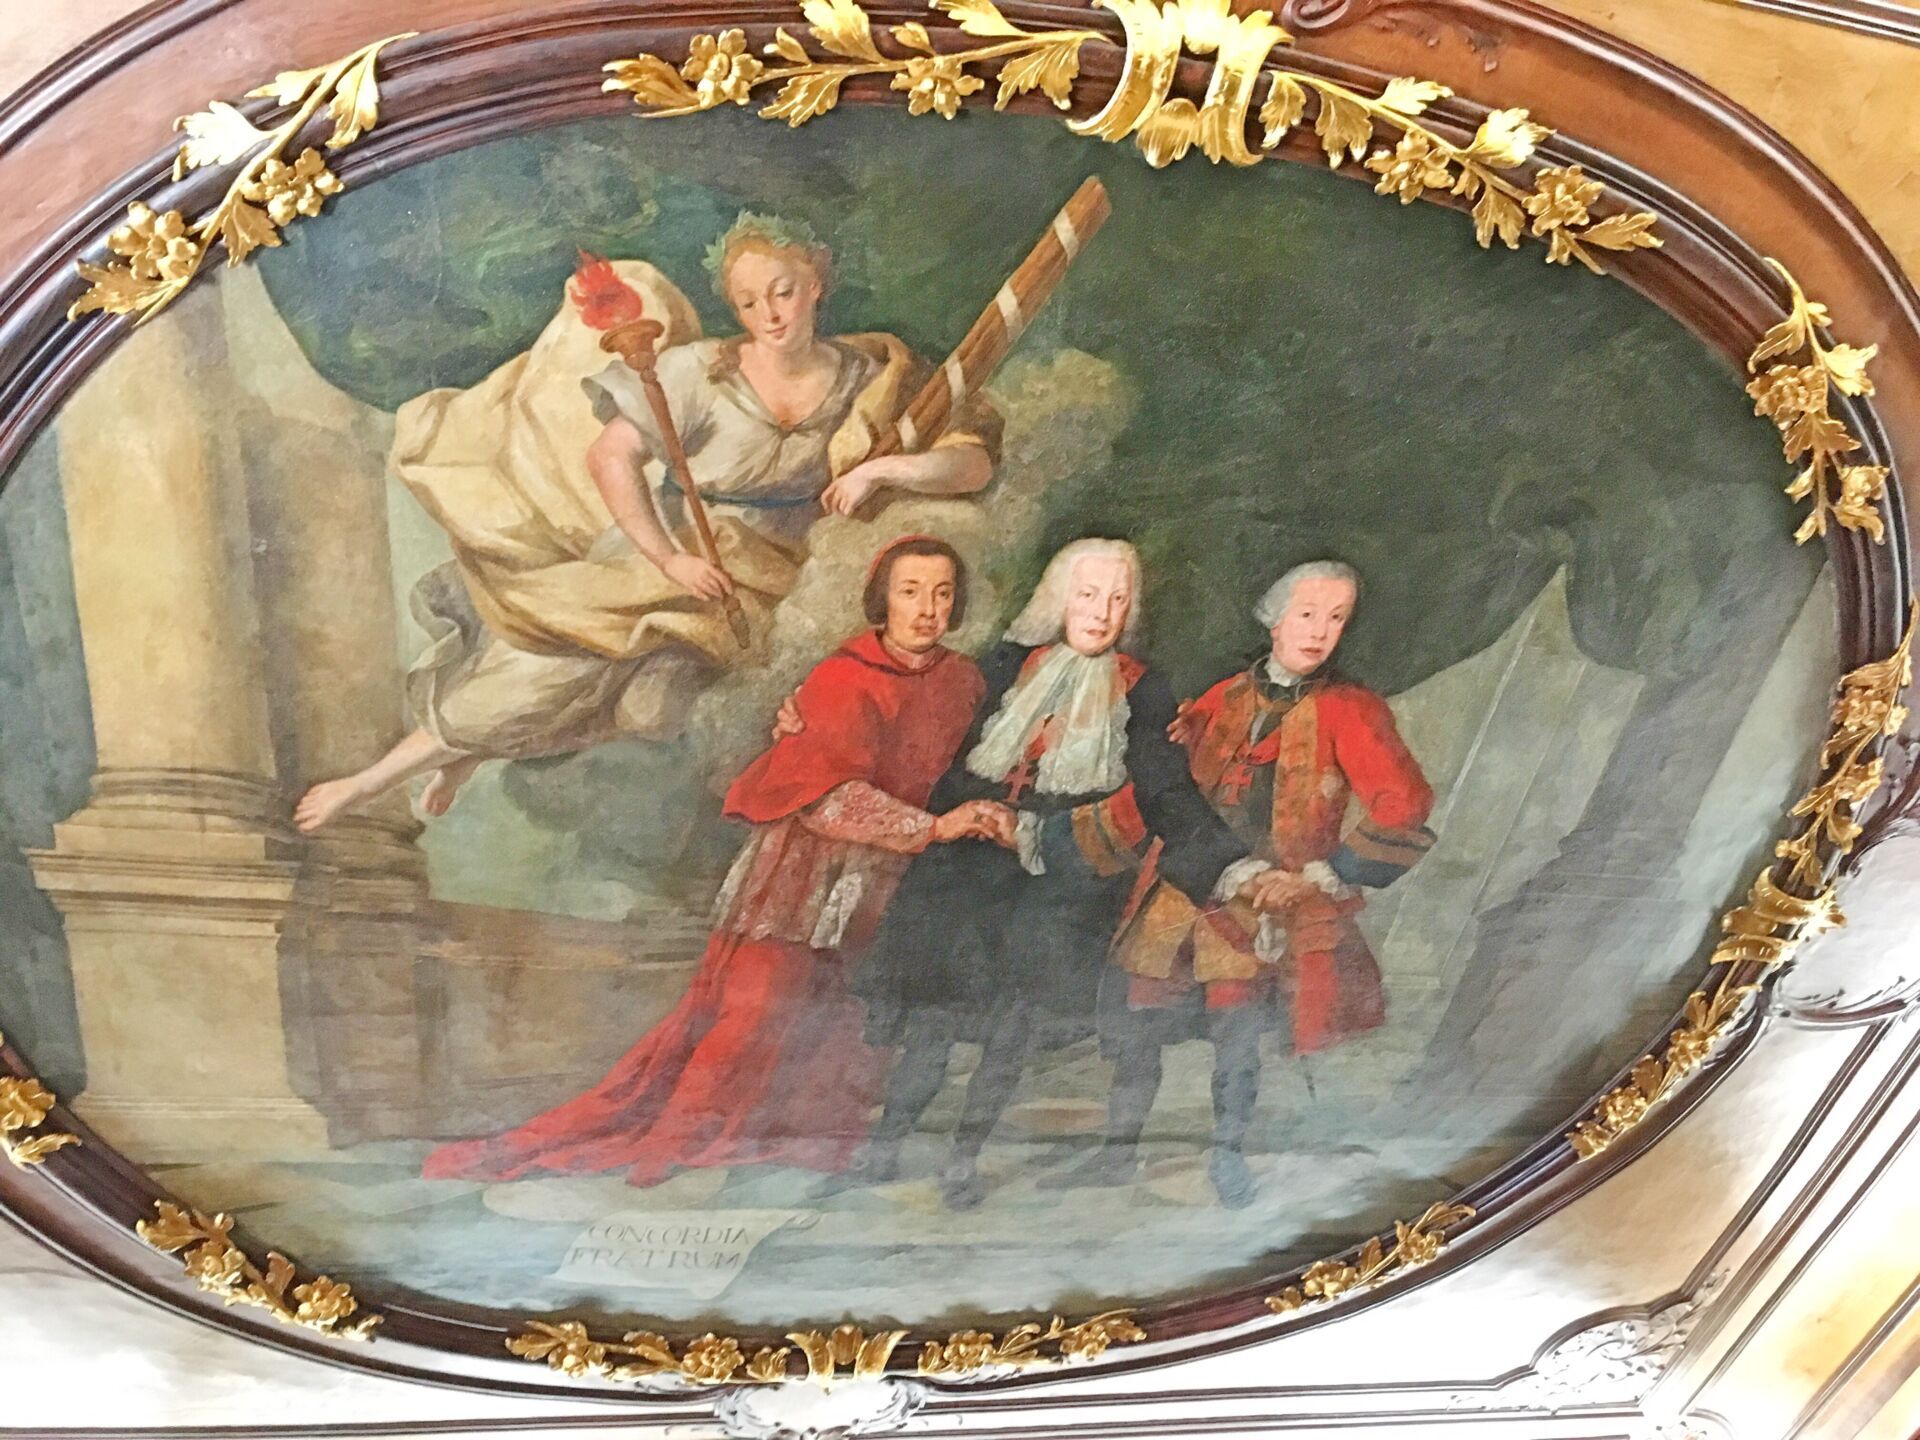 Brothers' painting